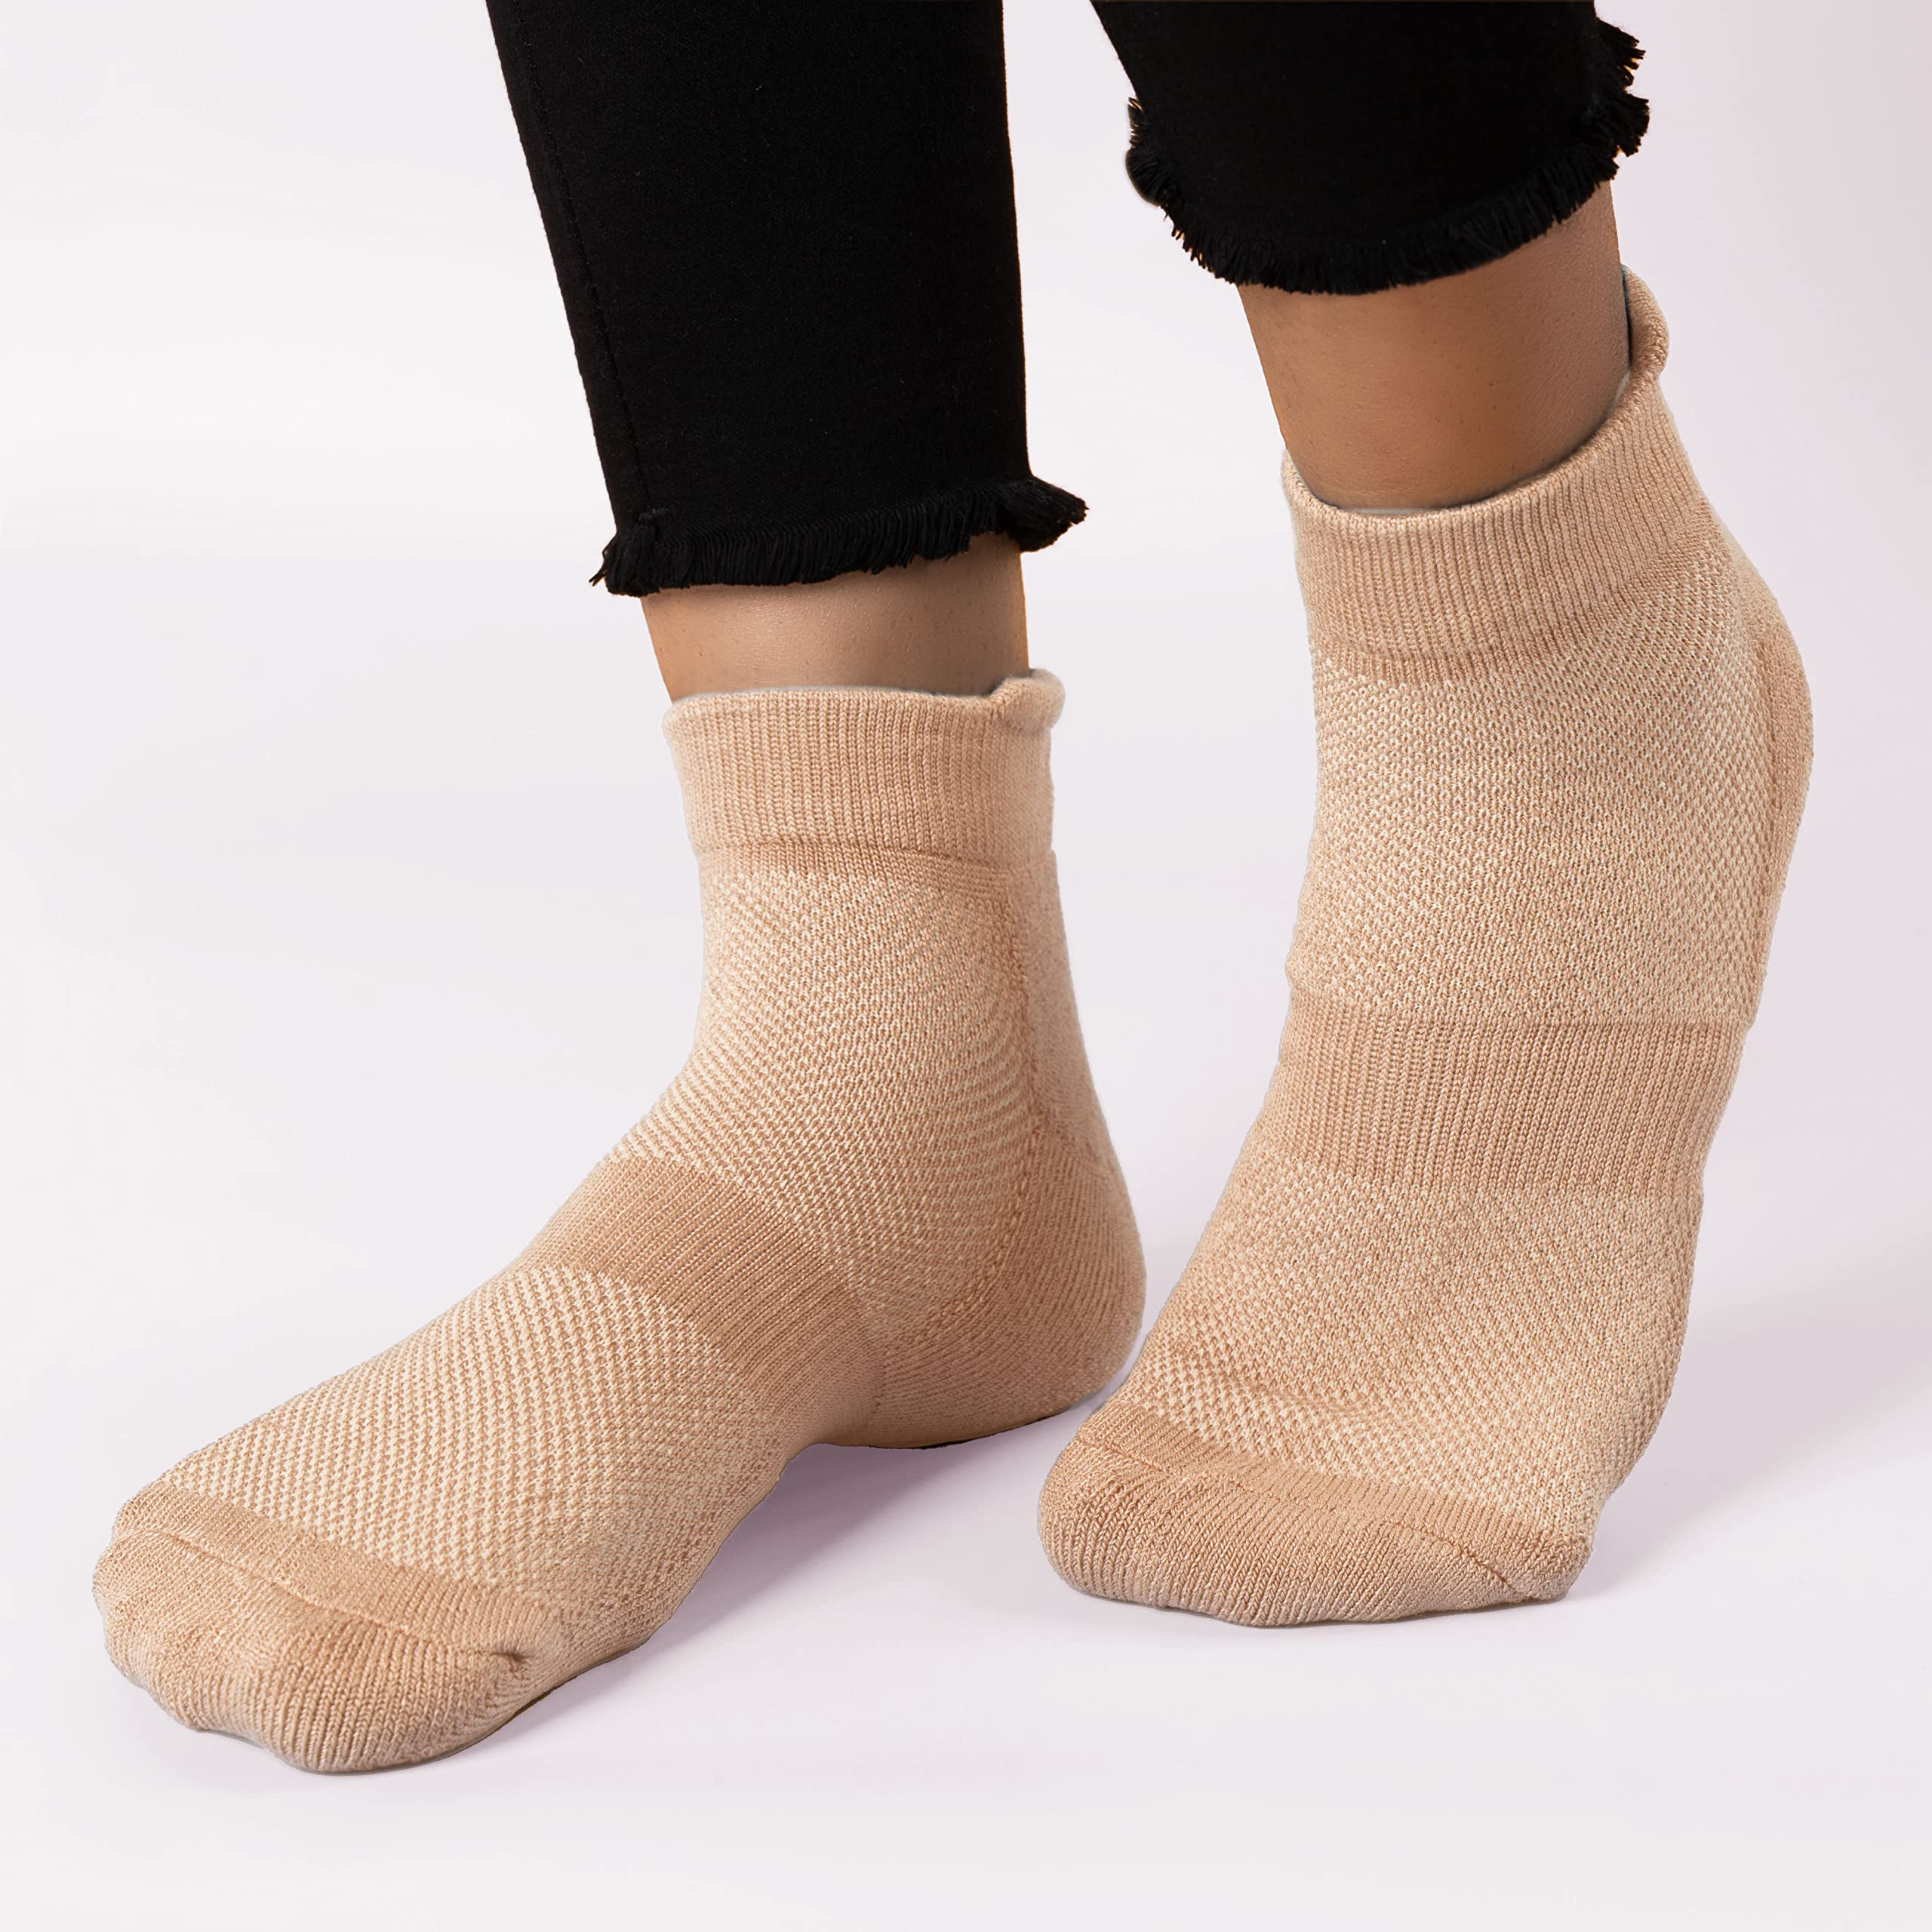 Mush Bamboo Ankle Socks for Women || Ultra Soft, Anti Odor and Anti Blister Design || For Casual Wear, Sports, Running, & Gym use || Free Size (Pack of 3)